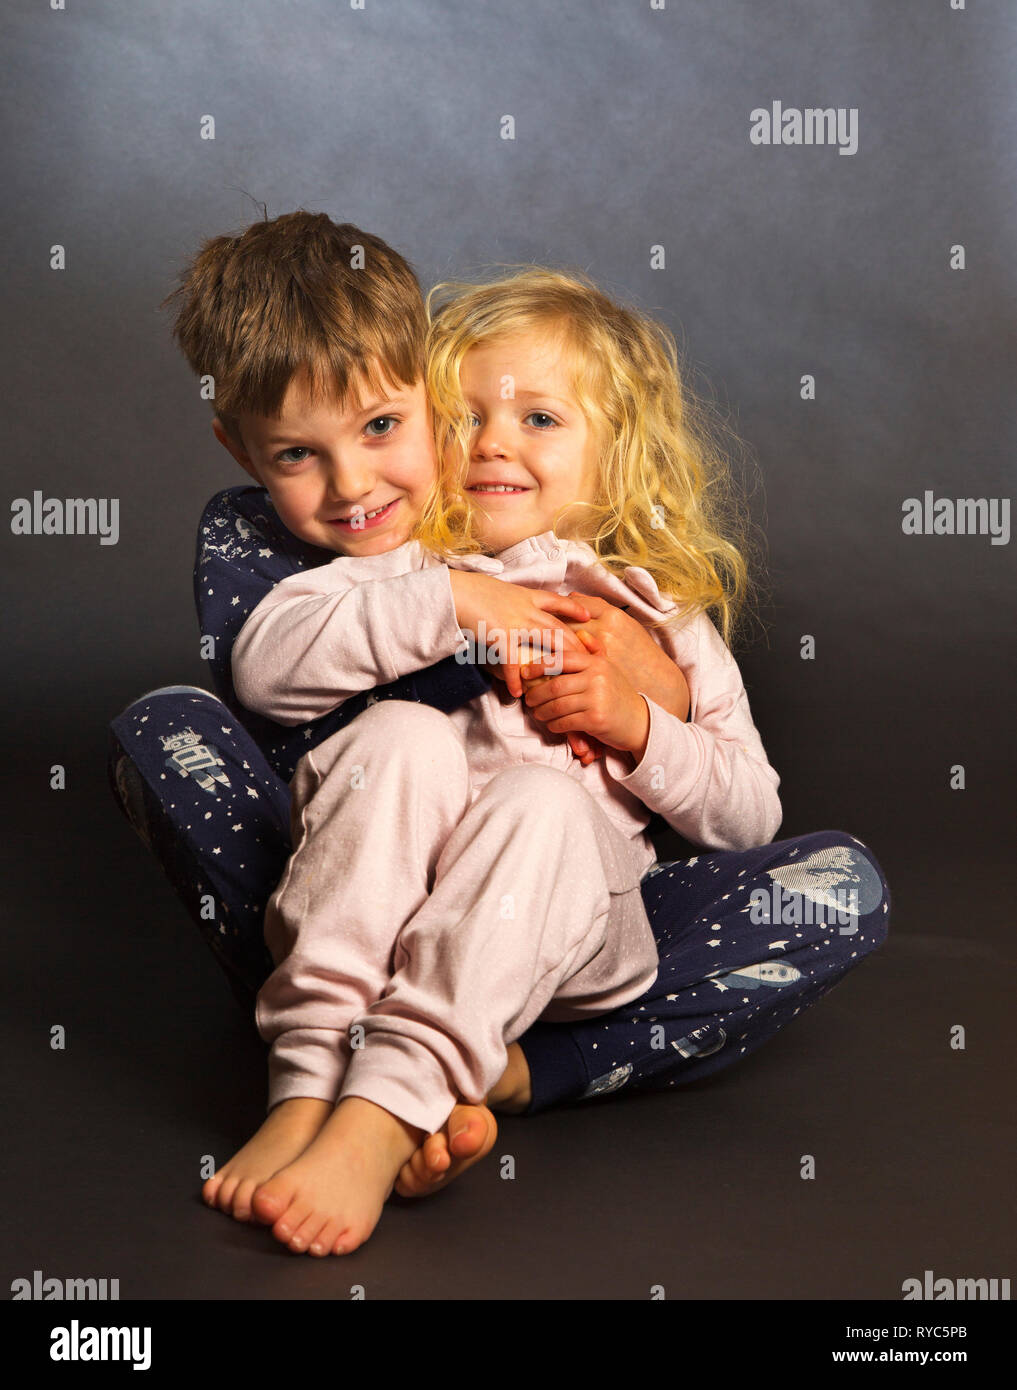 a brother and sister portrait at bedtime Stock Photo